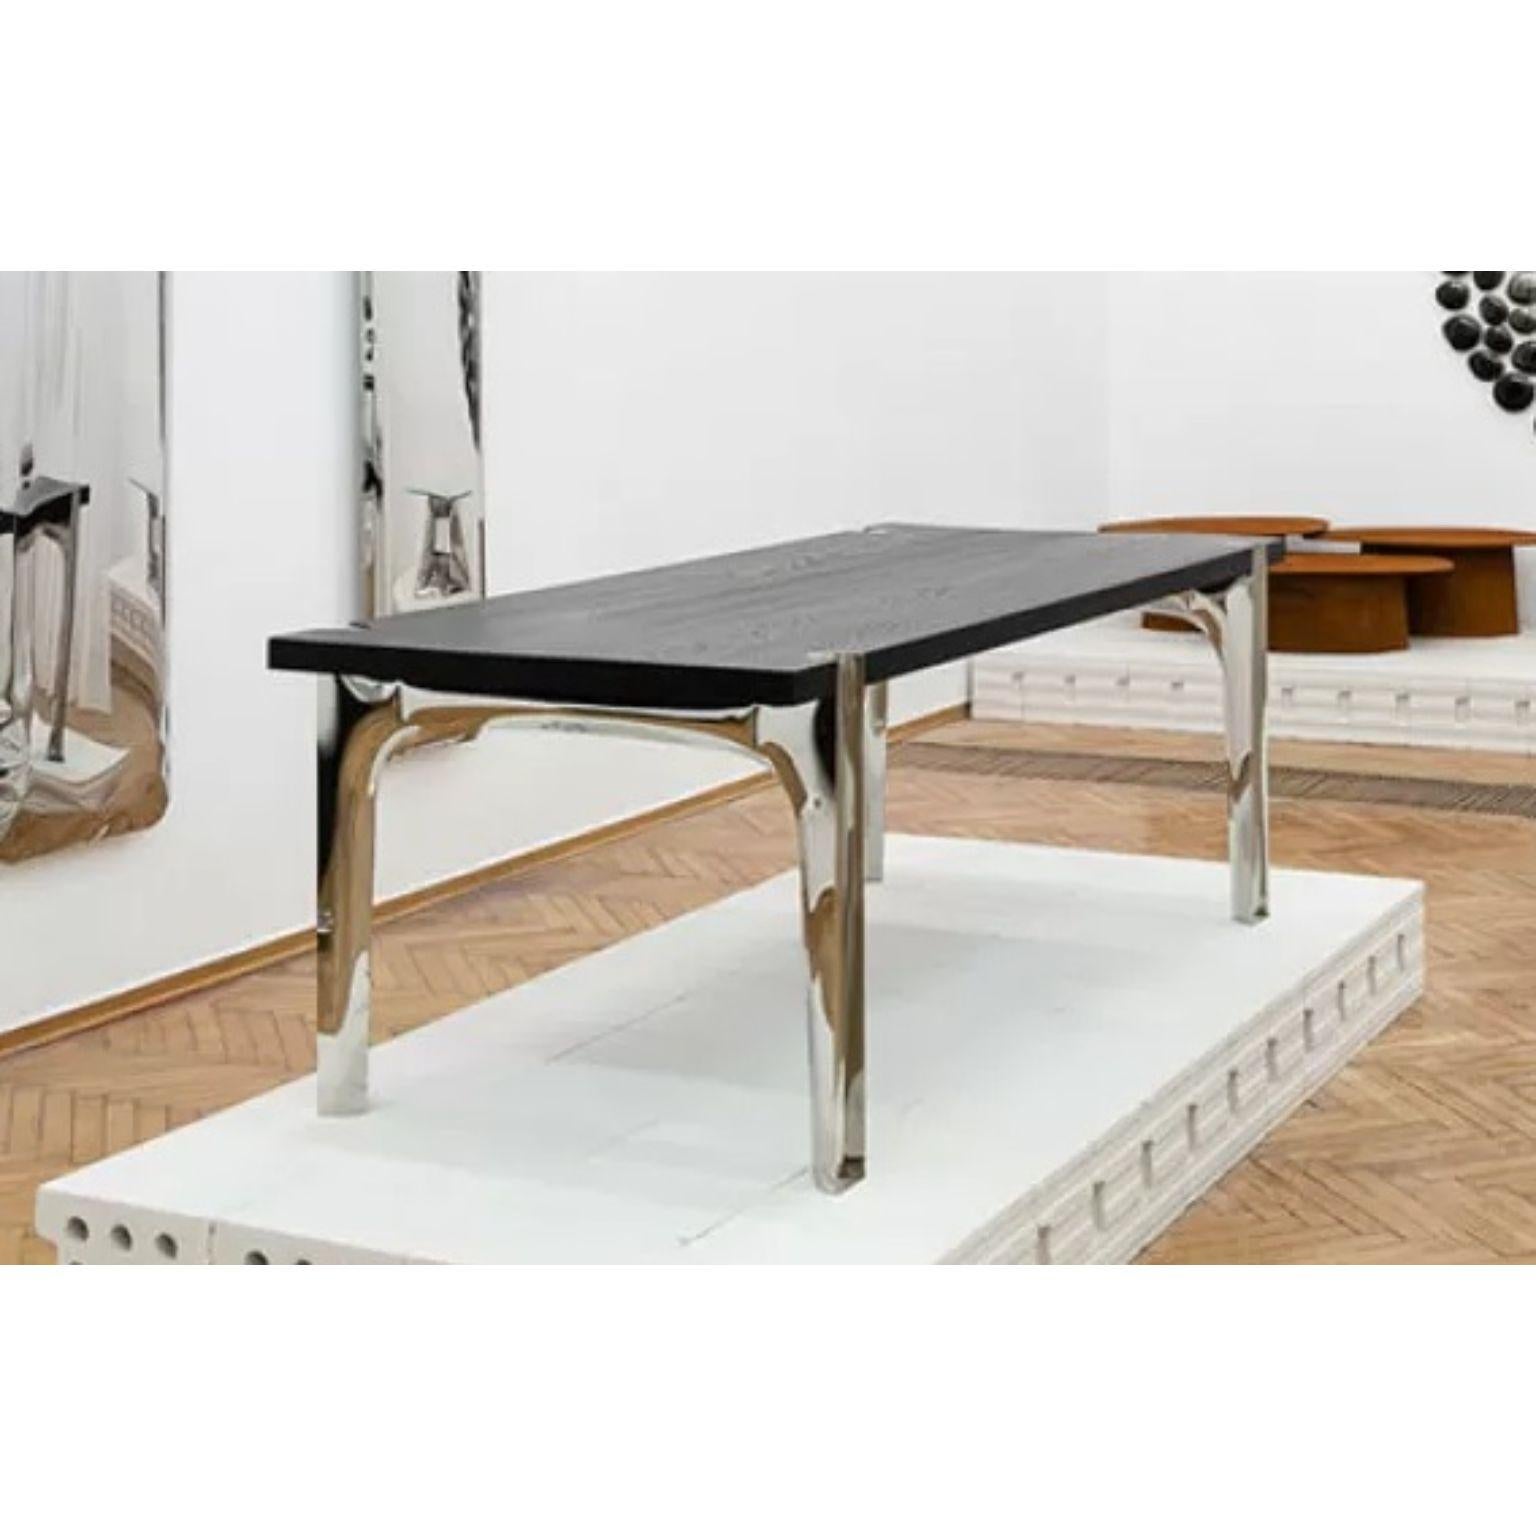 Lagom Oak Table by Zieta
Dimensions: D 95 x W 200 x H 75 cm.
Materials: Polished Stainless Steel Legs and Bog Oak top.

Tailor-made dialogue
Joining, separating and searching for balance, an intriguing juxtaposition of the durability and plasticity